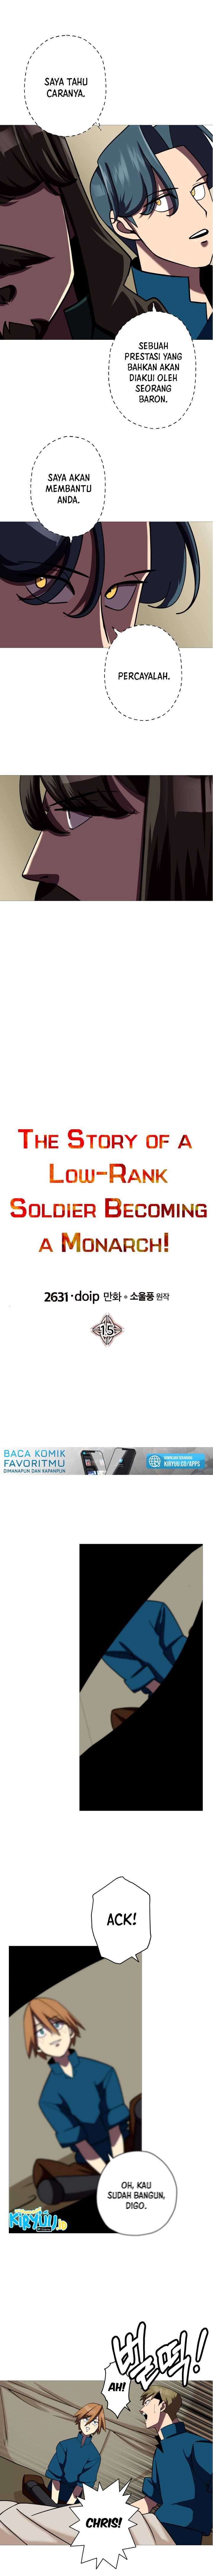 The Story of a Low-Rank Soldier Becoming a Monarch Chapter 15